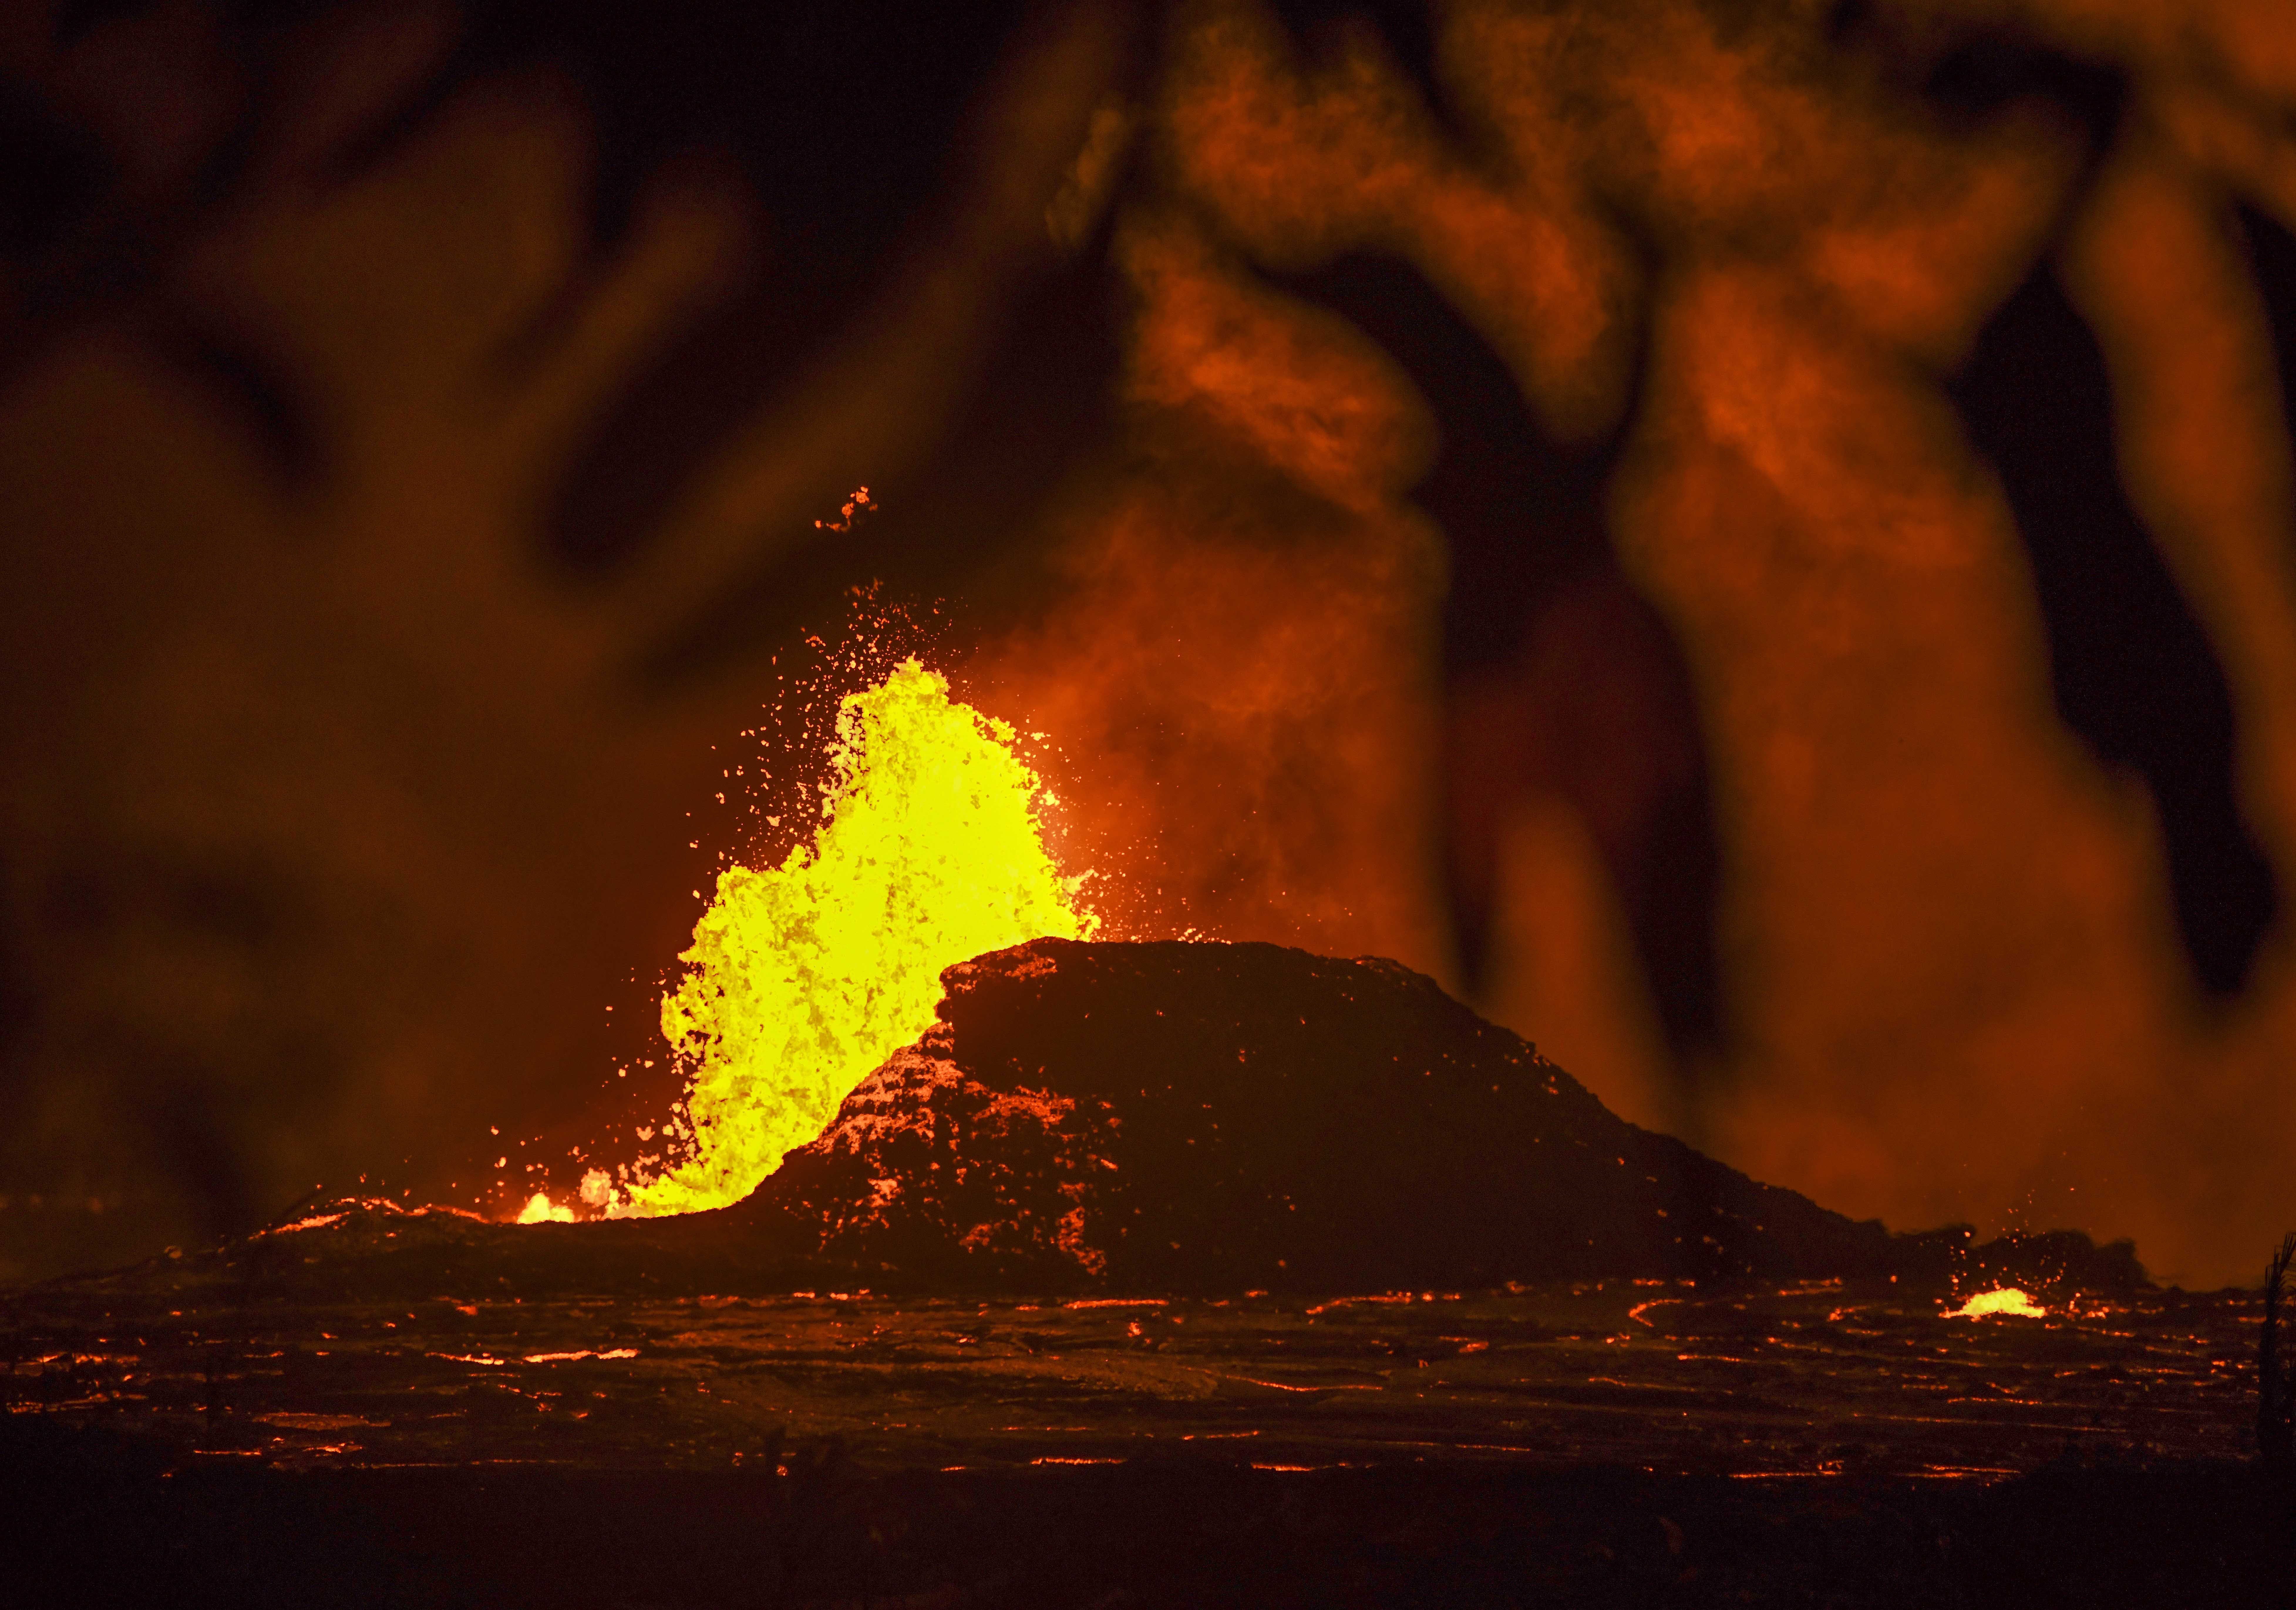 Lava from the Kilauea Volcano pours out of fissures in the earth creating an eerie nighttime scene on May 23, 2018 in Pahoa, Hawaii.  Kilauea is one of the most active volcanoes in the world and one of five on the Big Island of Hawaii. It erupted May 